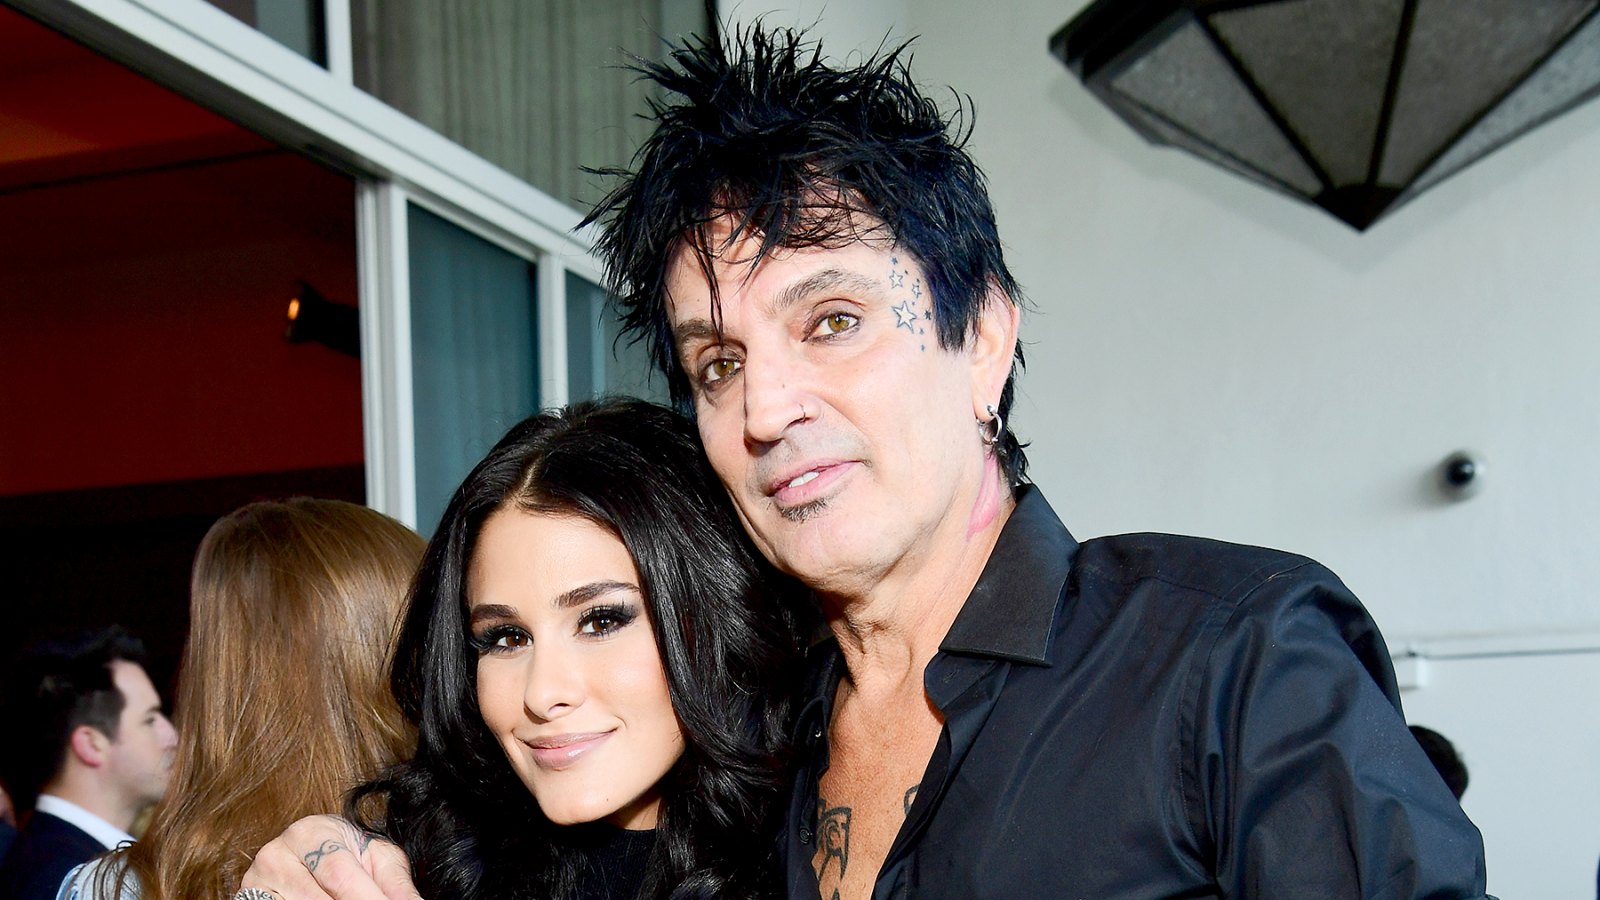 Brittany-Furlan-and-Tommy-Lee-engaged